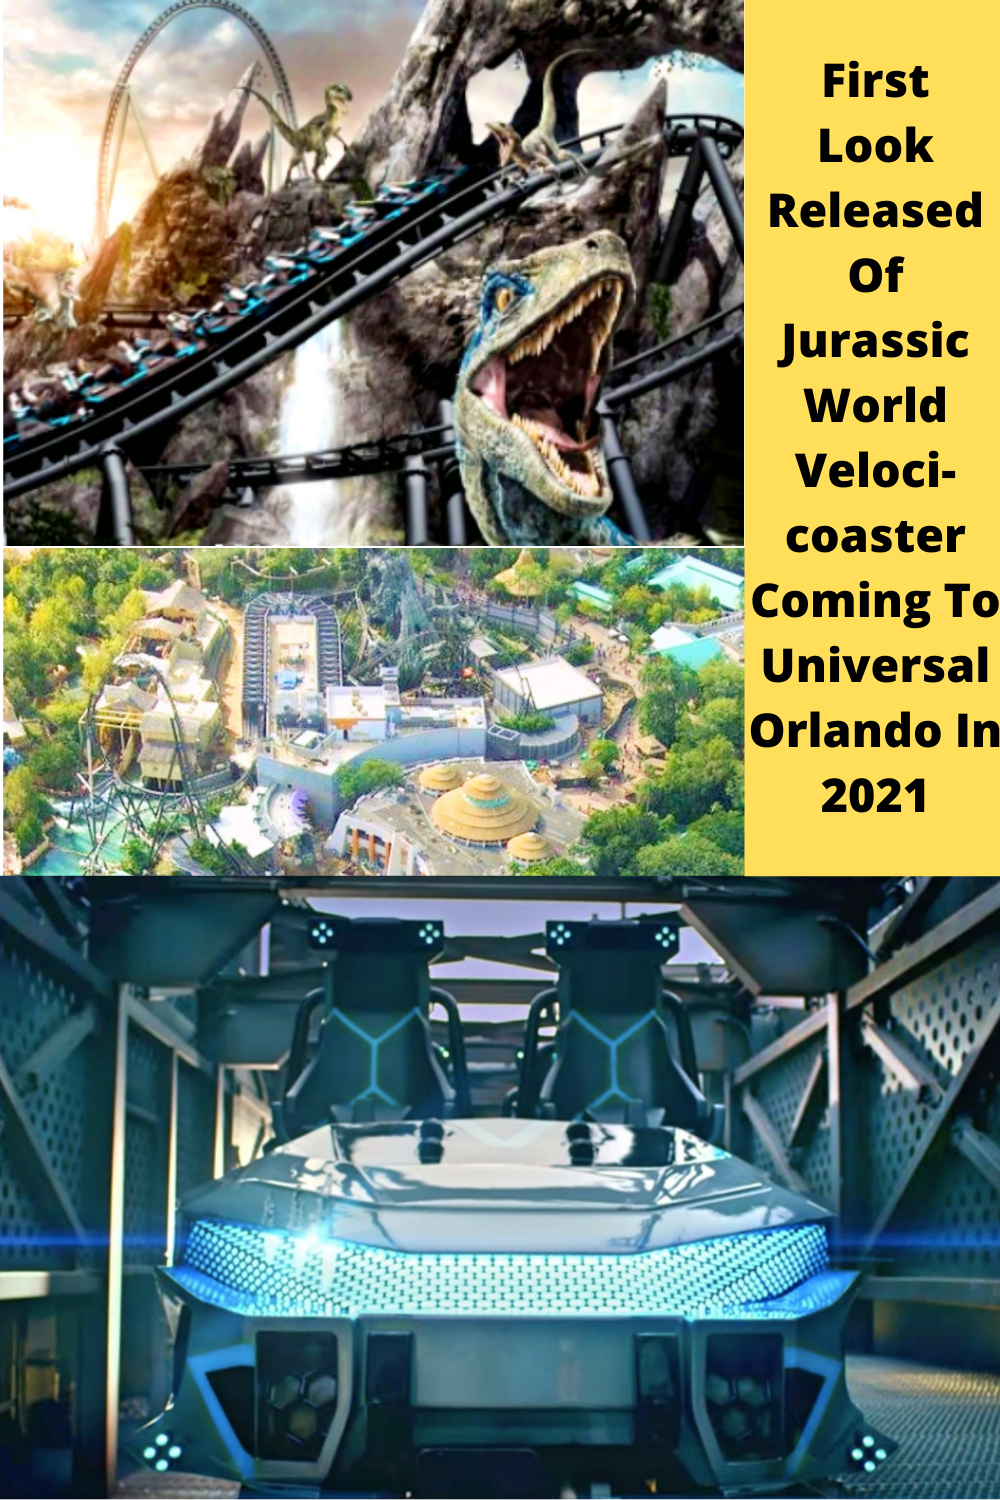 First Look Released Of Jurassic World Velocicoaster Coming To Universal Orlando In 2021